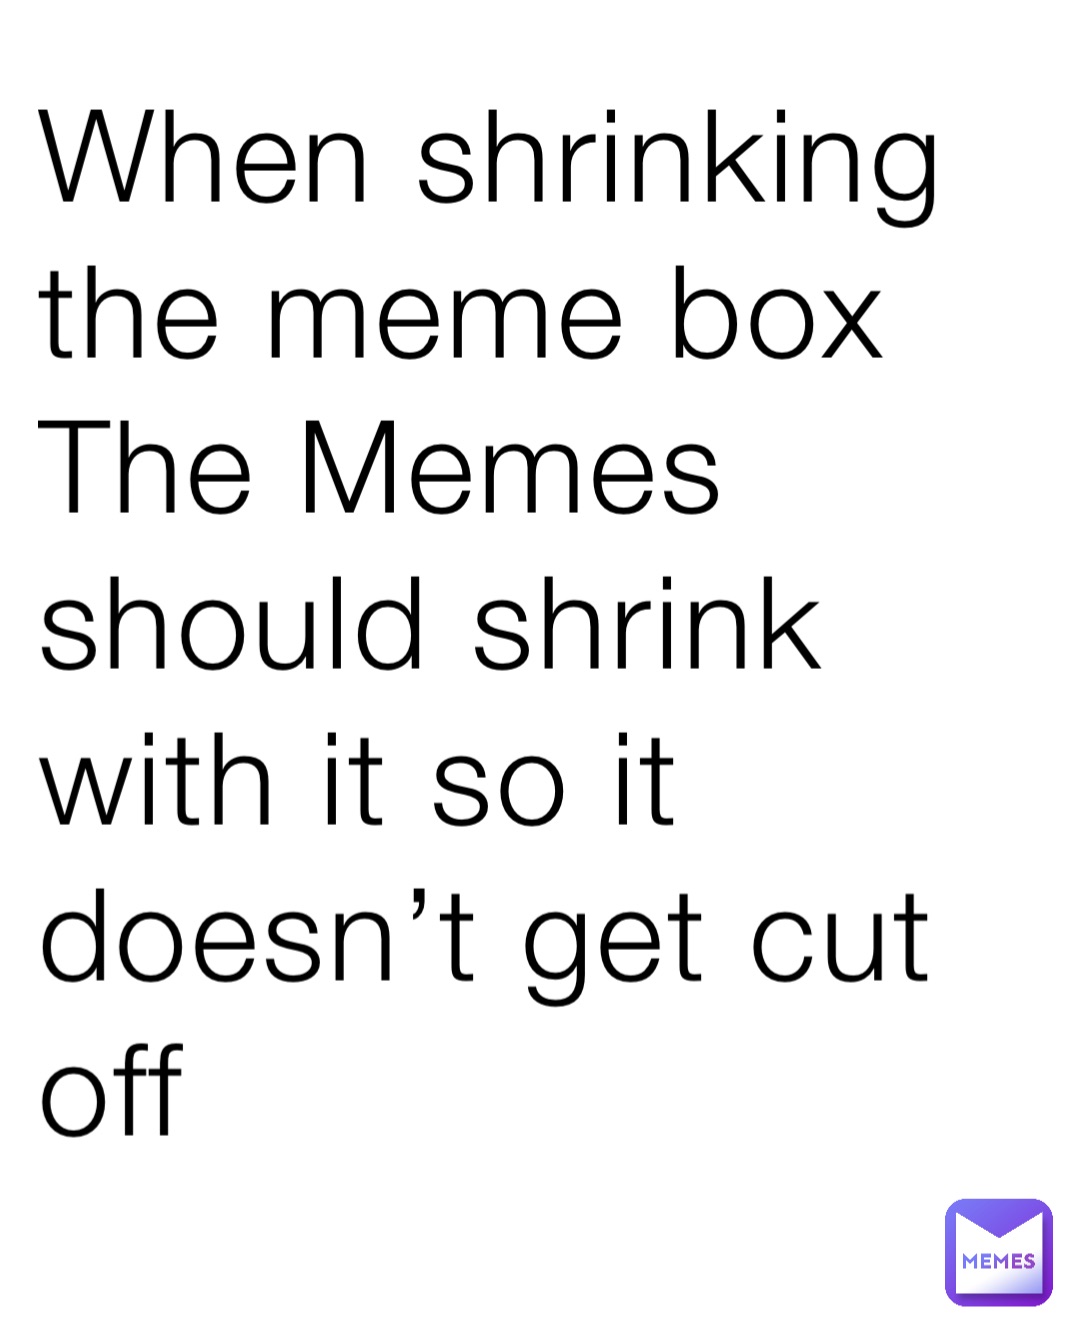 When shrinking the meme box The Memes should shrink with it so it doesn’t get cut off